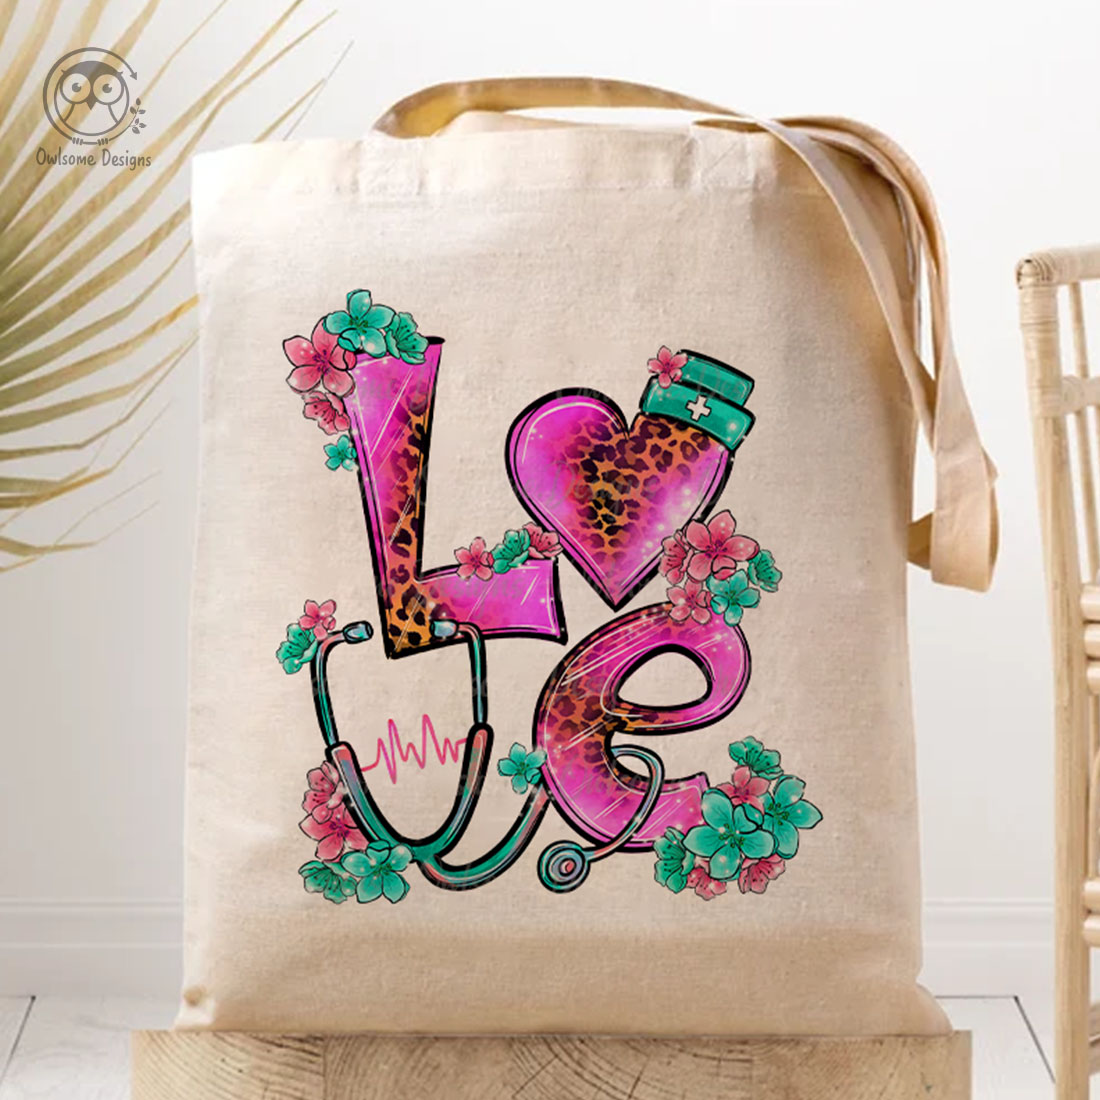 Image of bag with colorful inscription Love with nurse accessories.